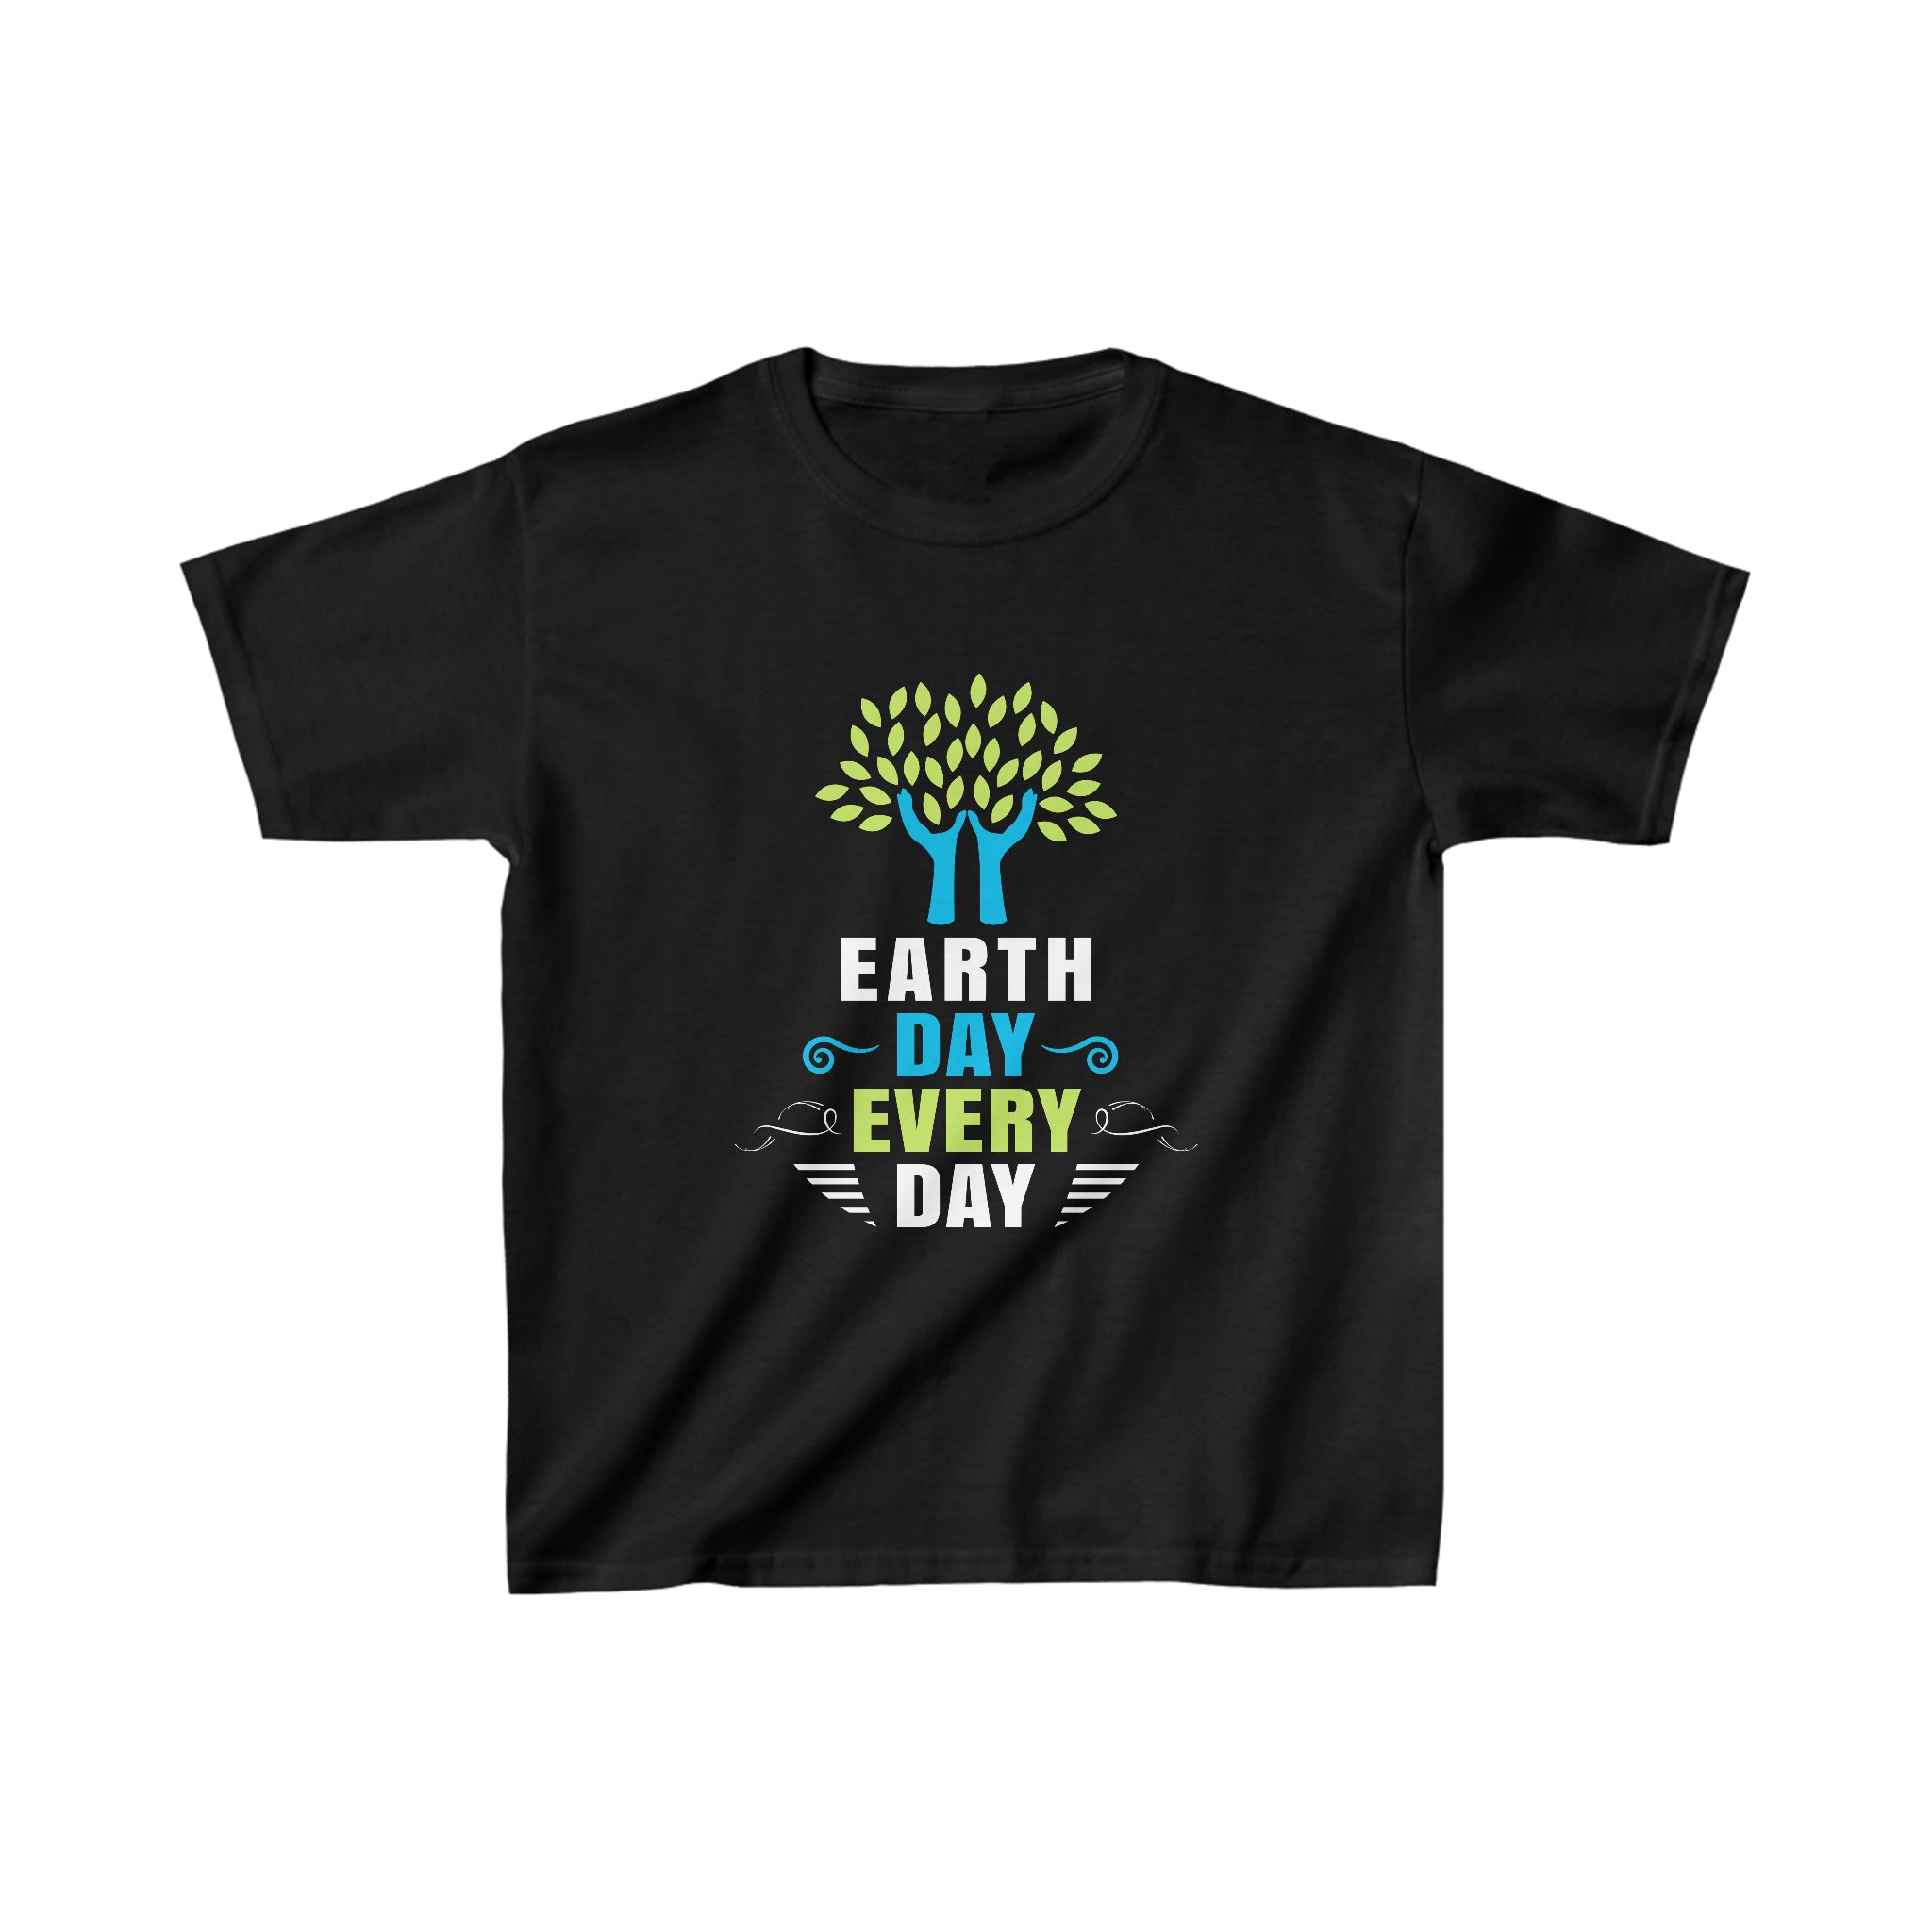 Everyday is Earth Day TShirt Earth Day Shirt Save the Planet Boys Shirt